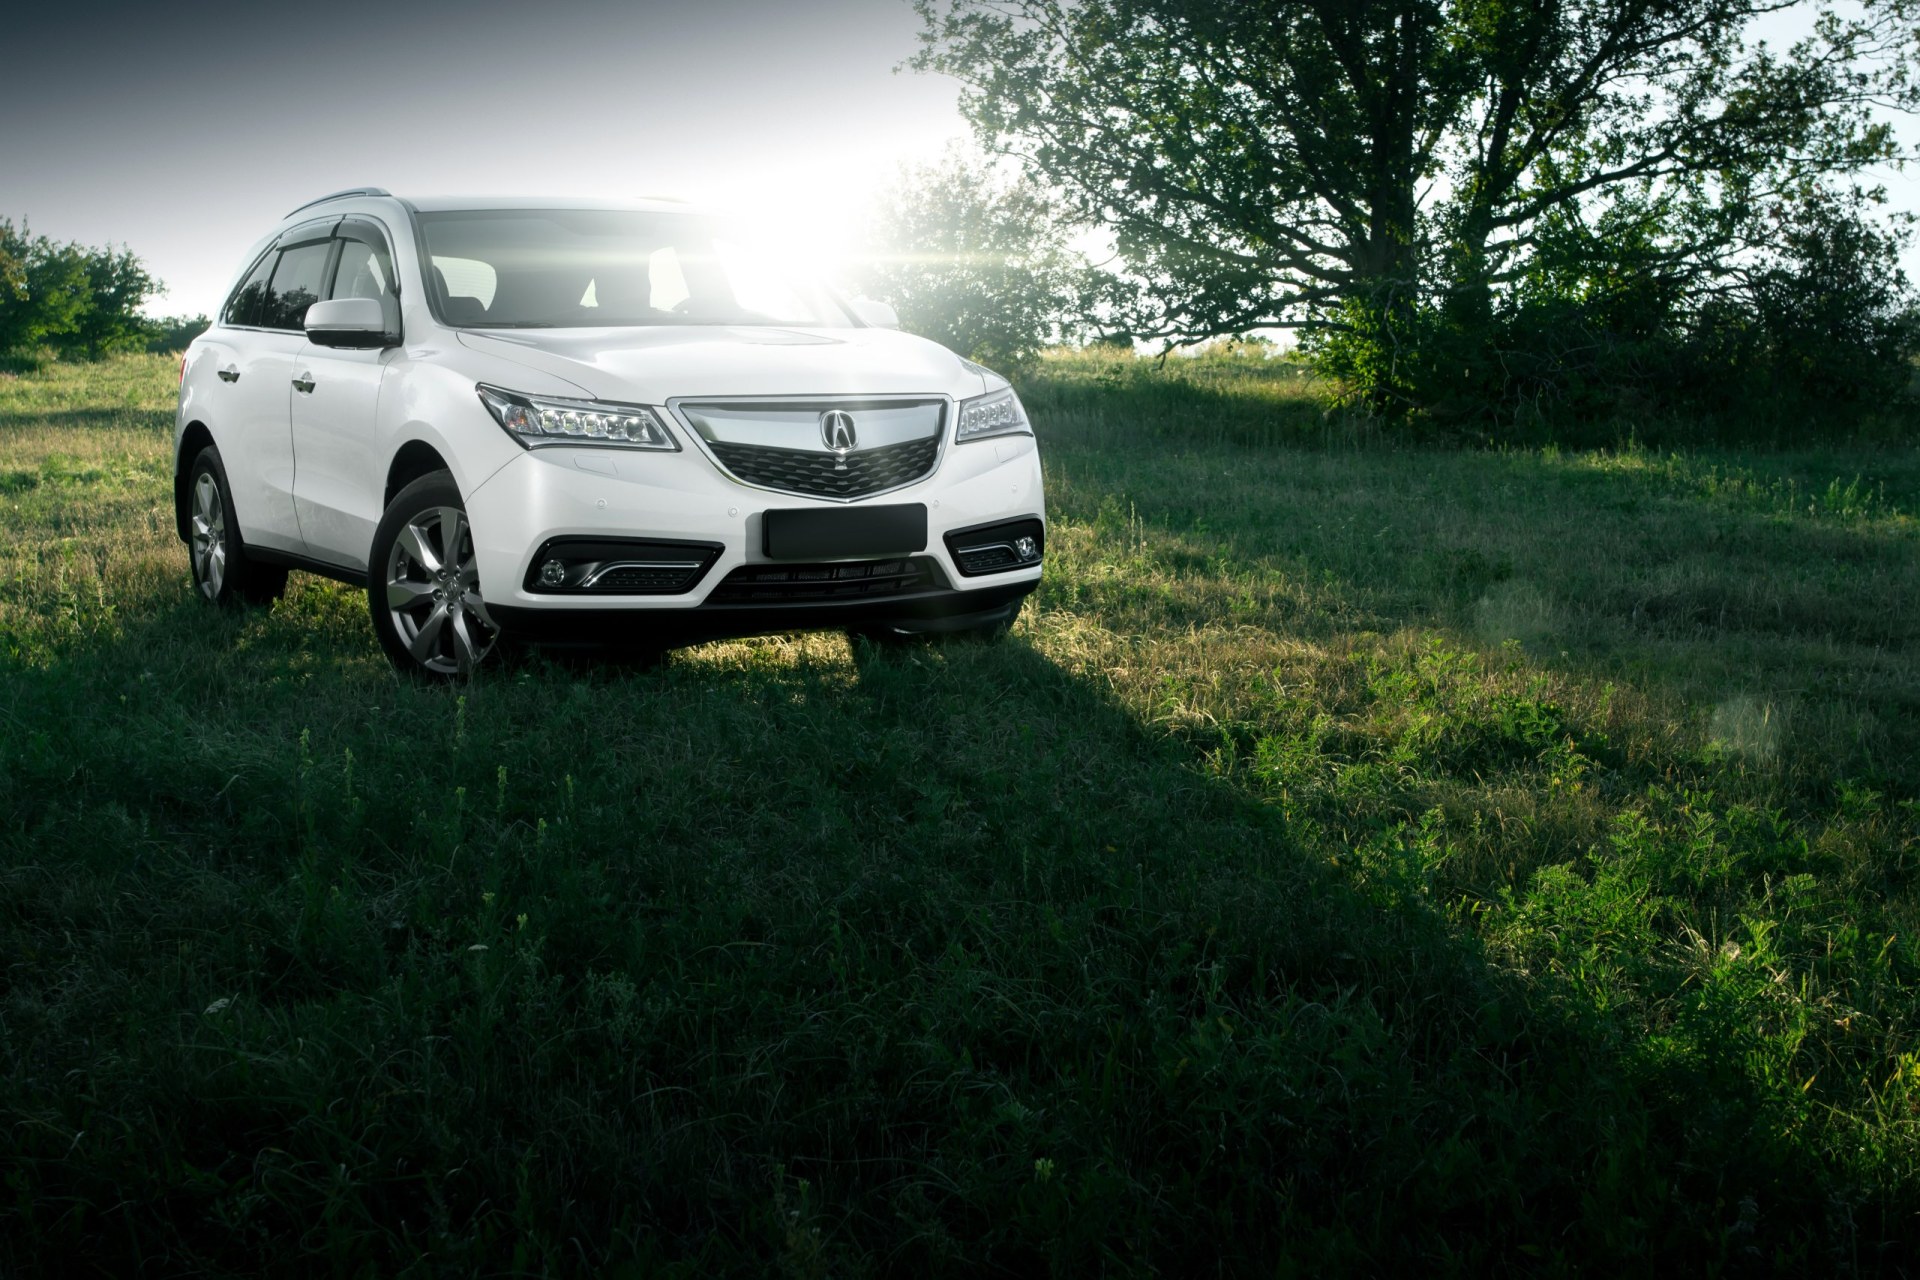 2016 Acura MDX standing on road at sunset